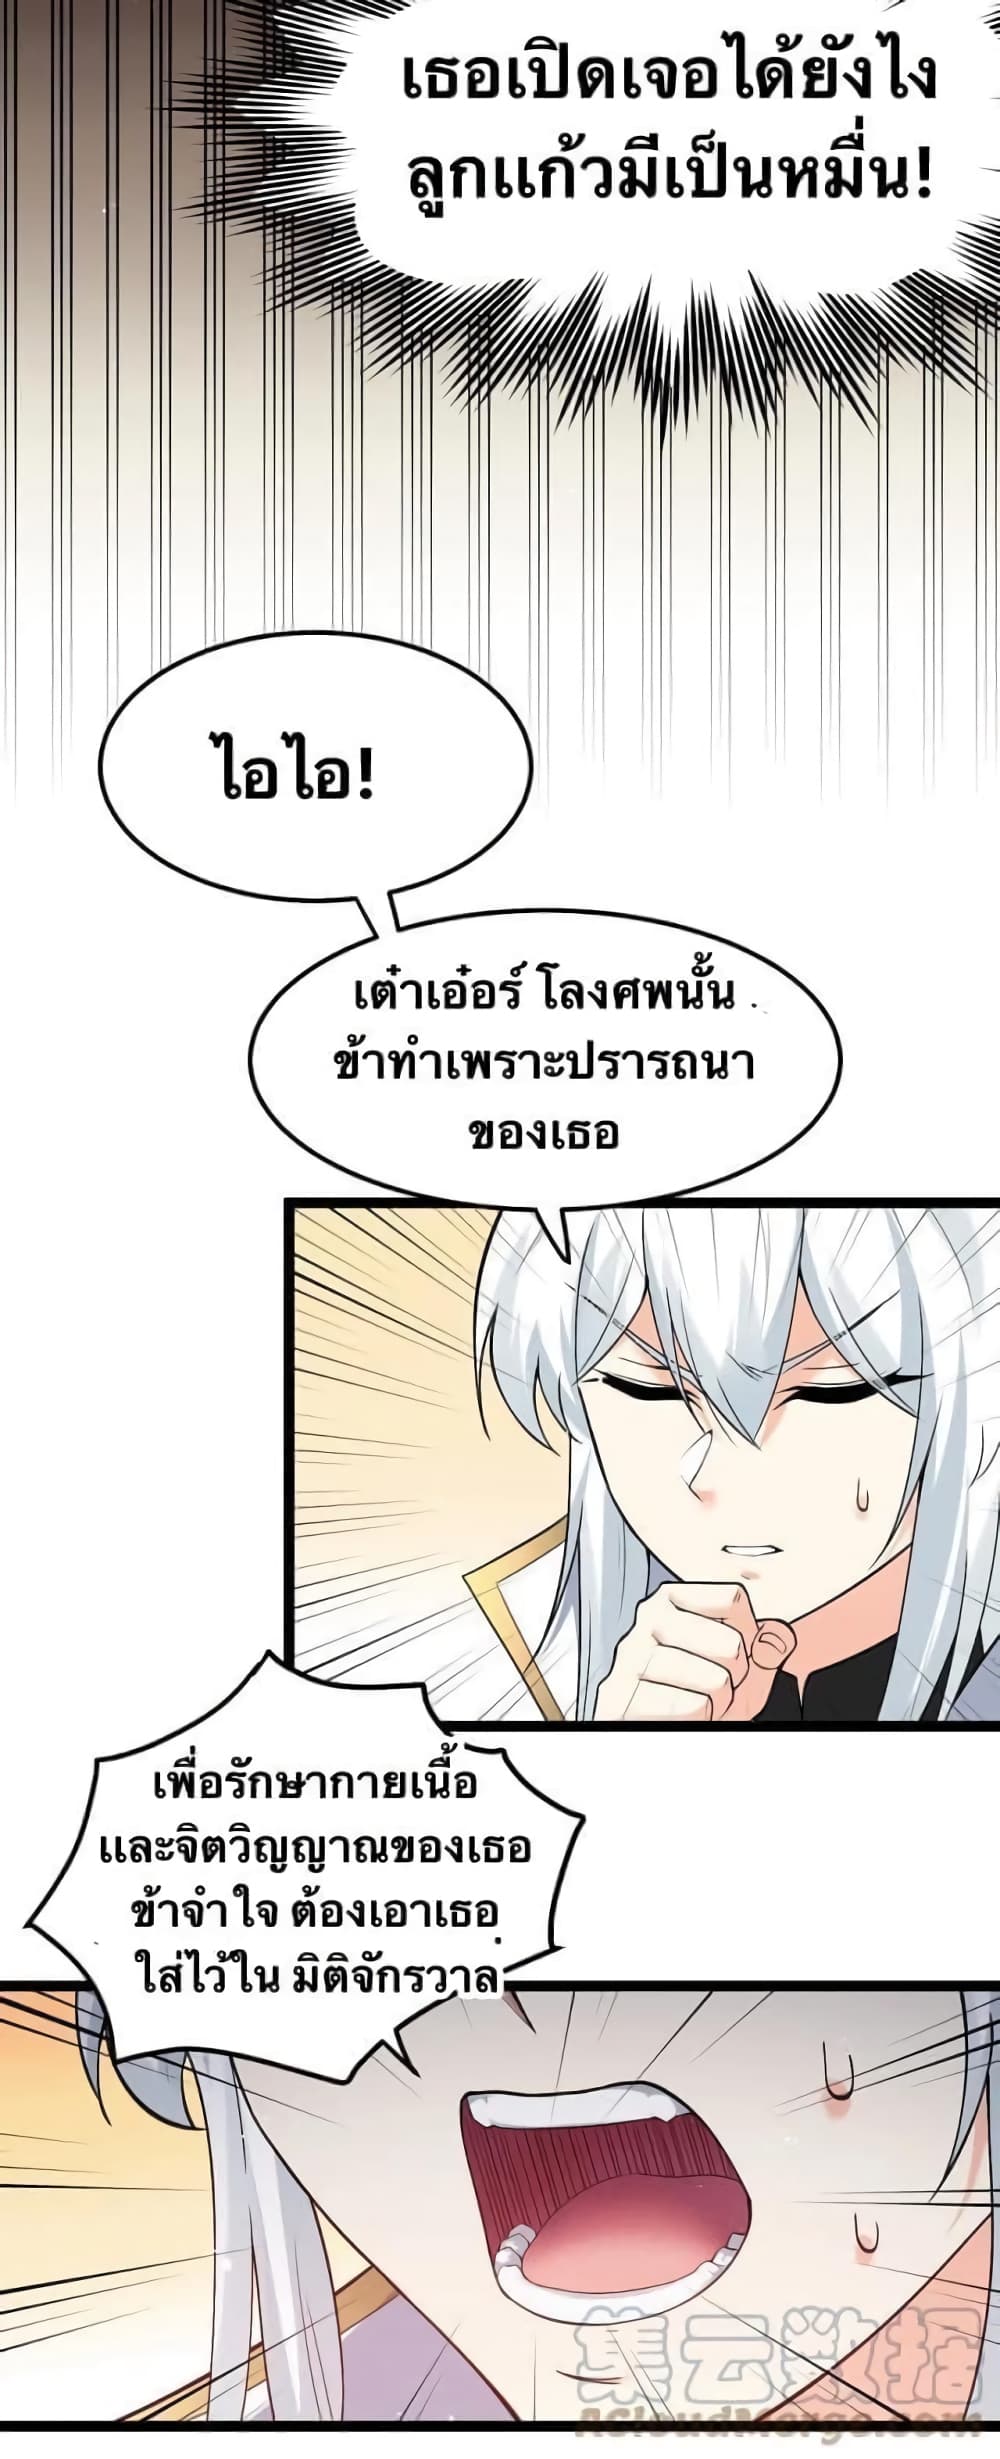 Godsian Masian from another world ตอนที่ 80 (26)